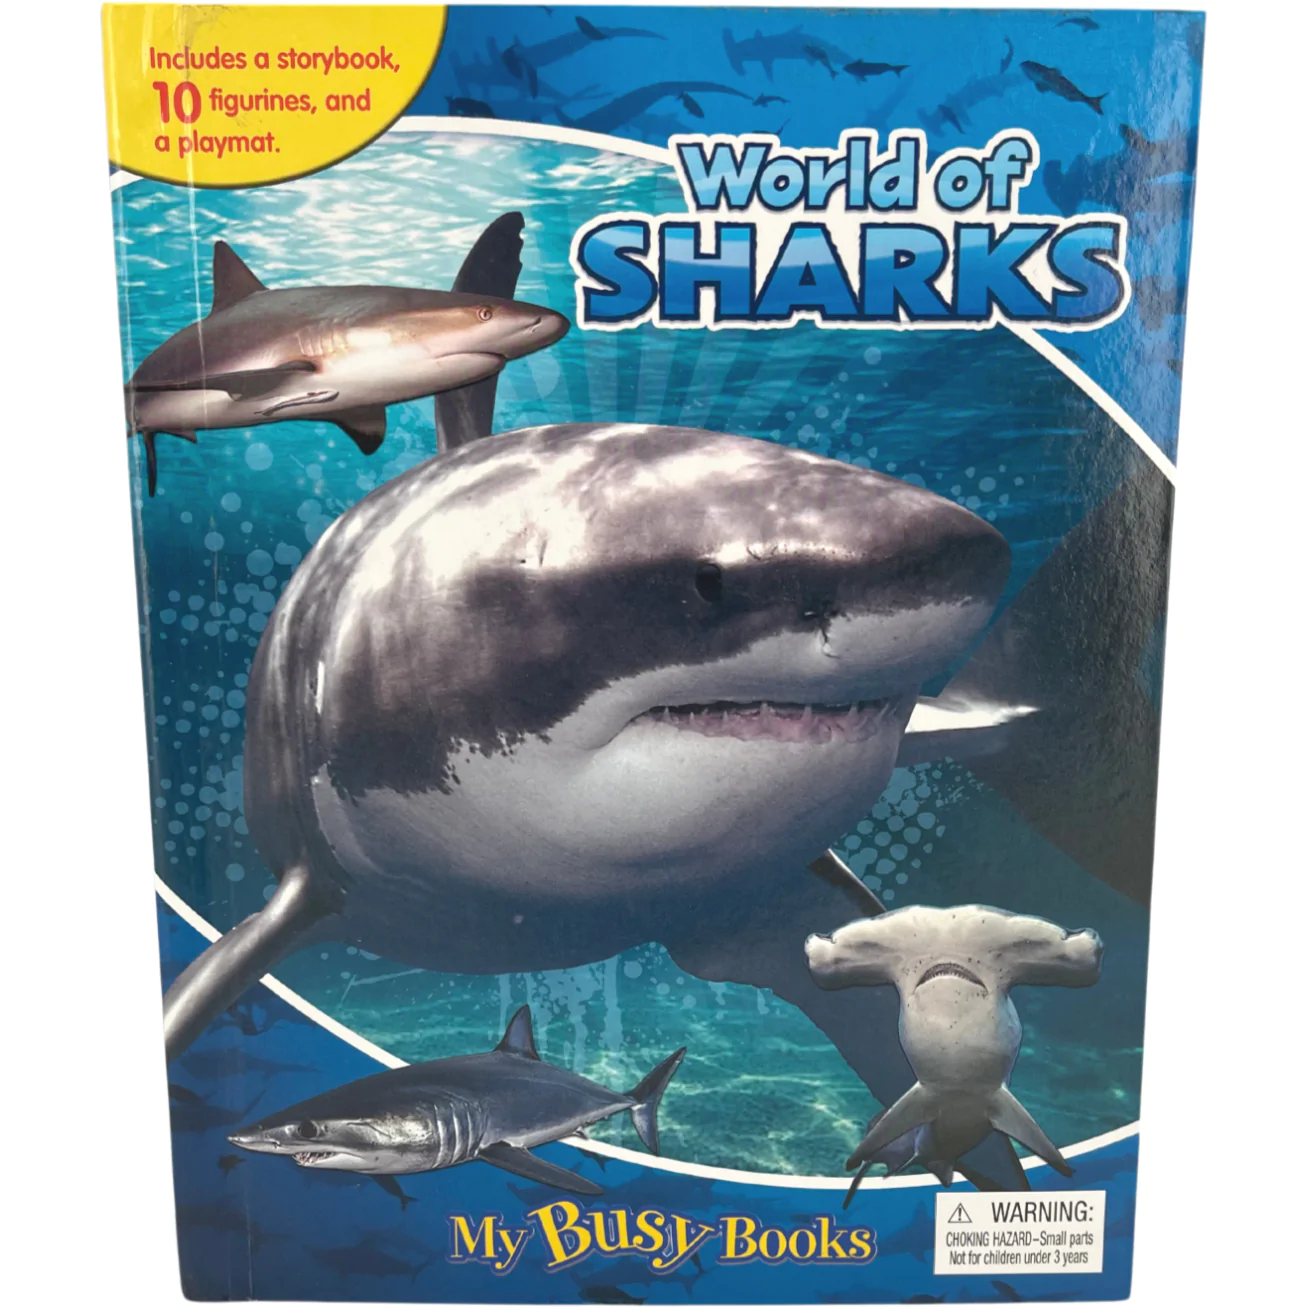 My Busy Books World of Sharks Set / Storybook with Shark Figures / Ages 3+ **DEALS**